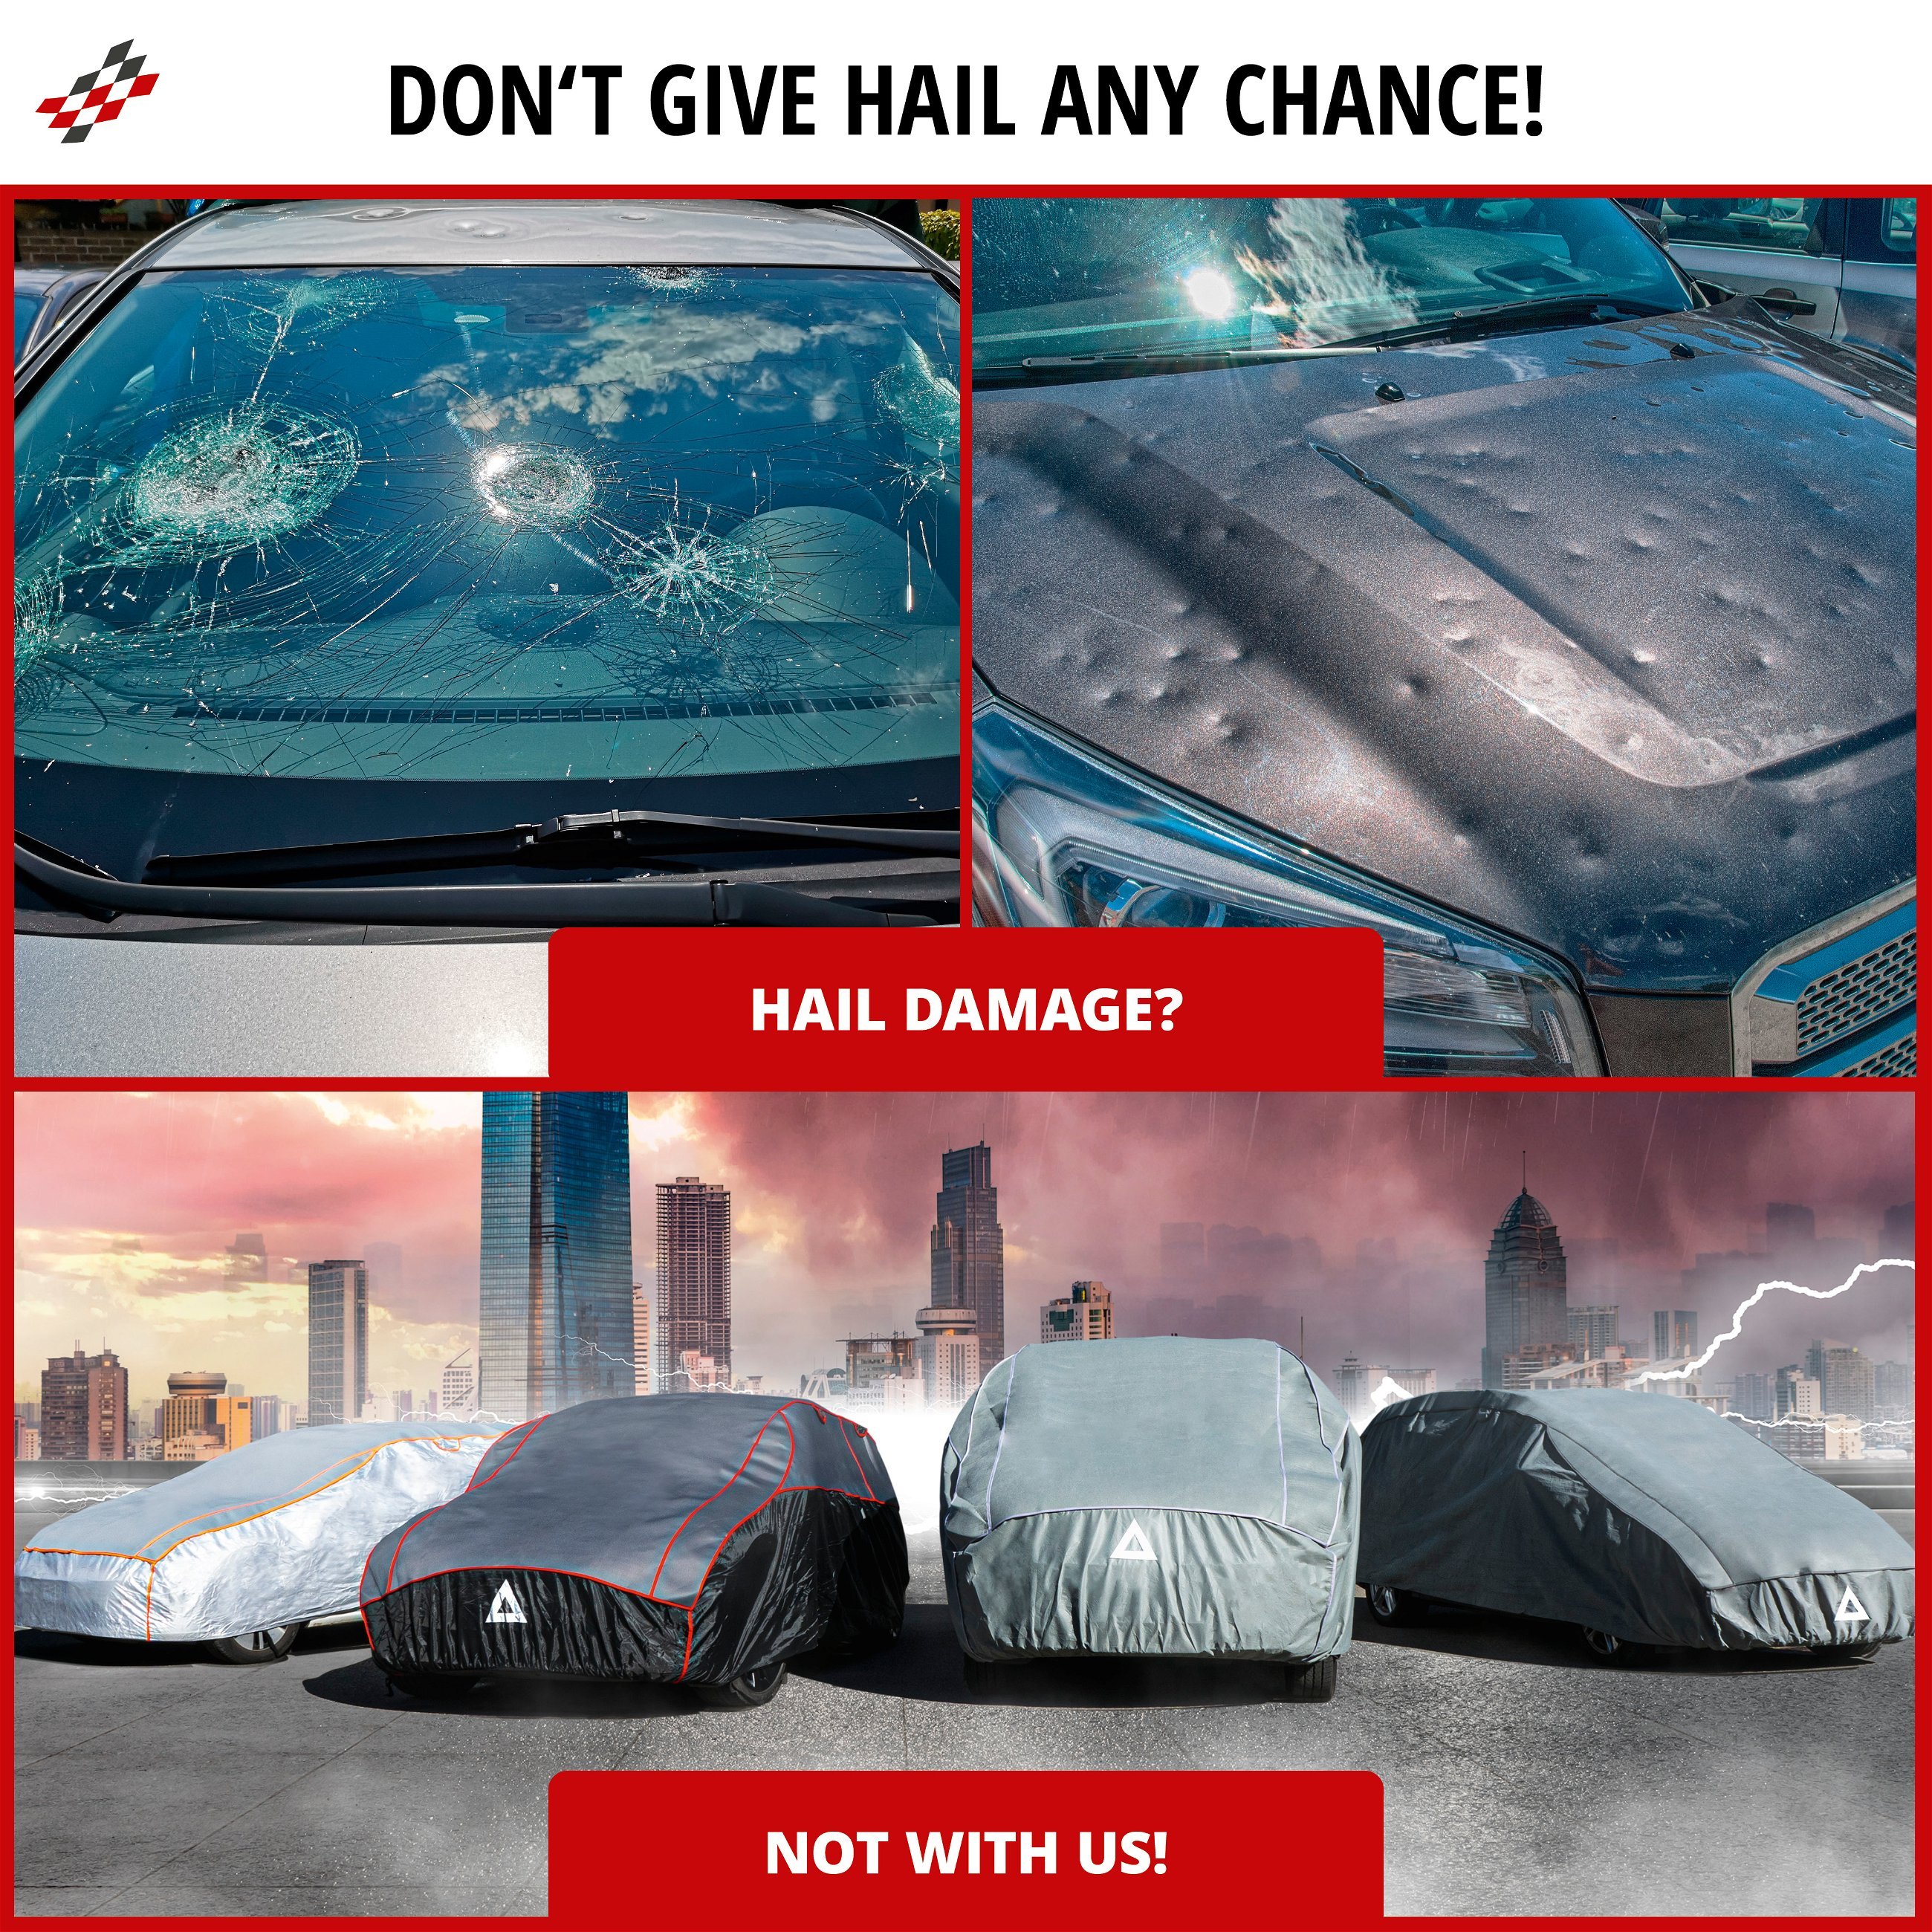 Car hail protection cover Hybrid UV Protect size L